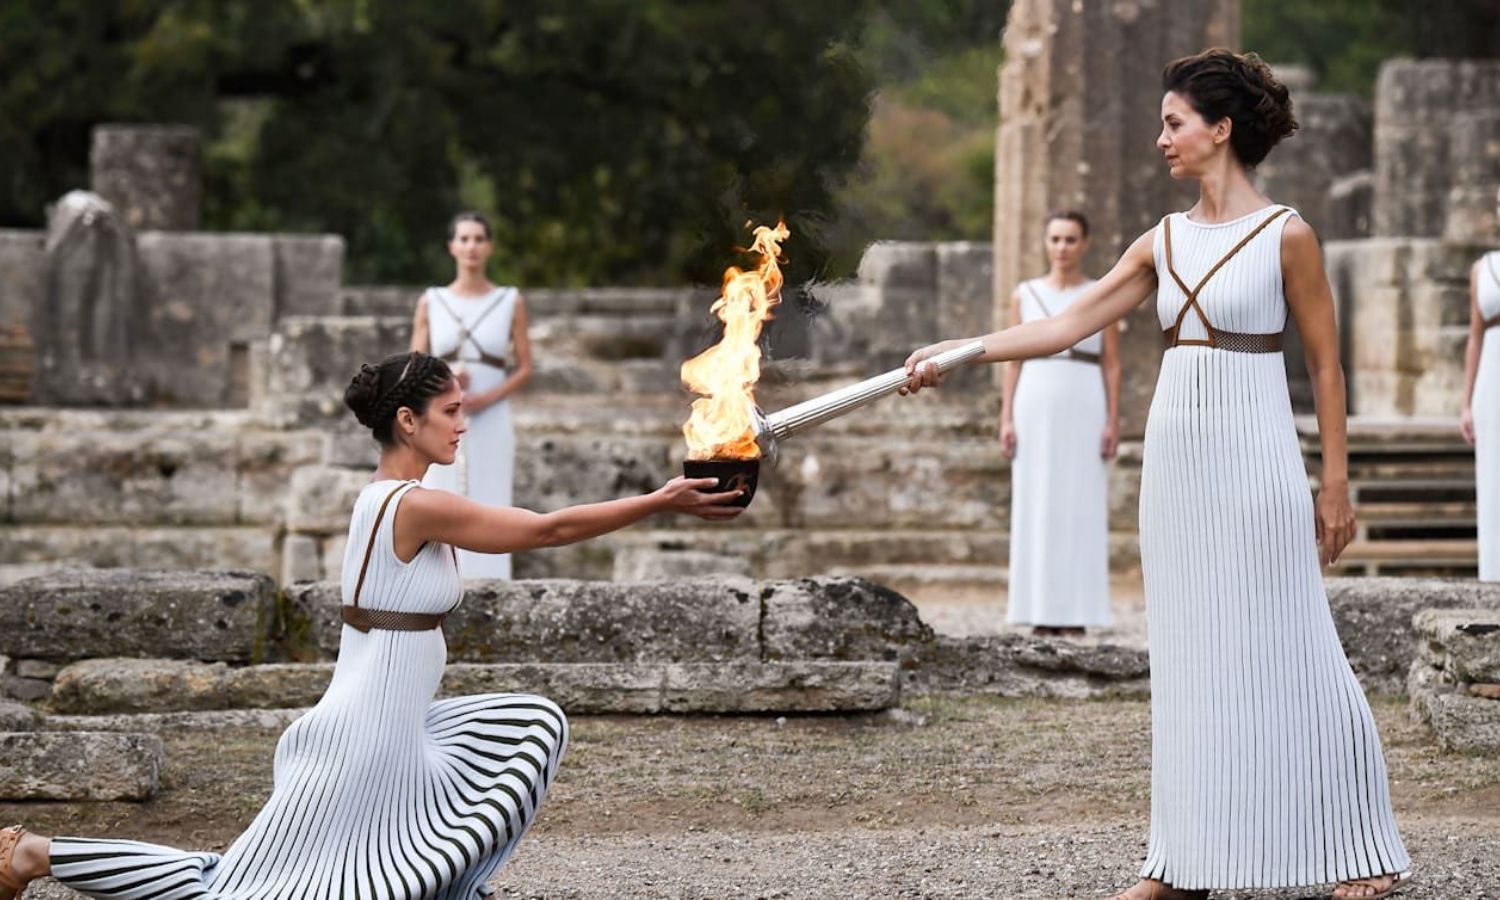 Paris Olympics flame to be lit at Games' birthplace in Olympia